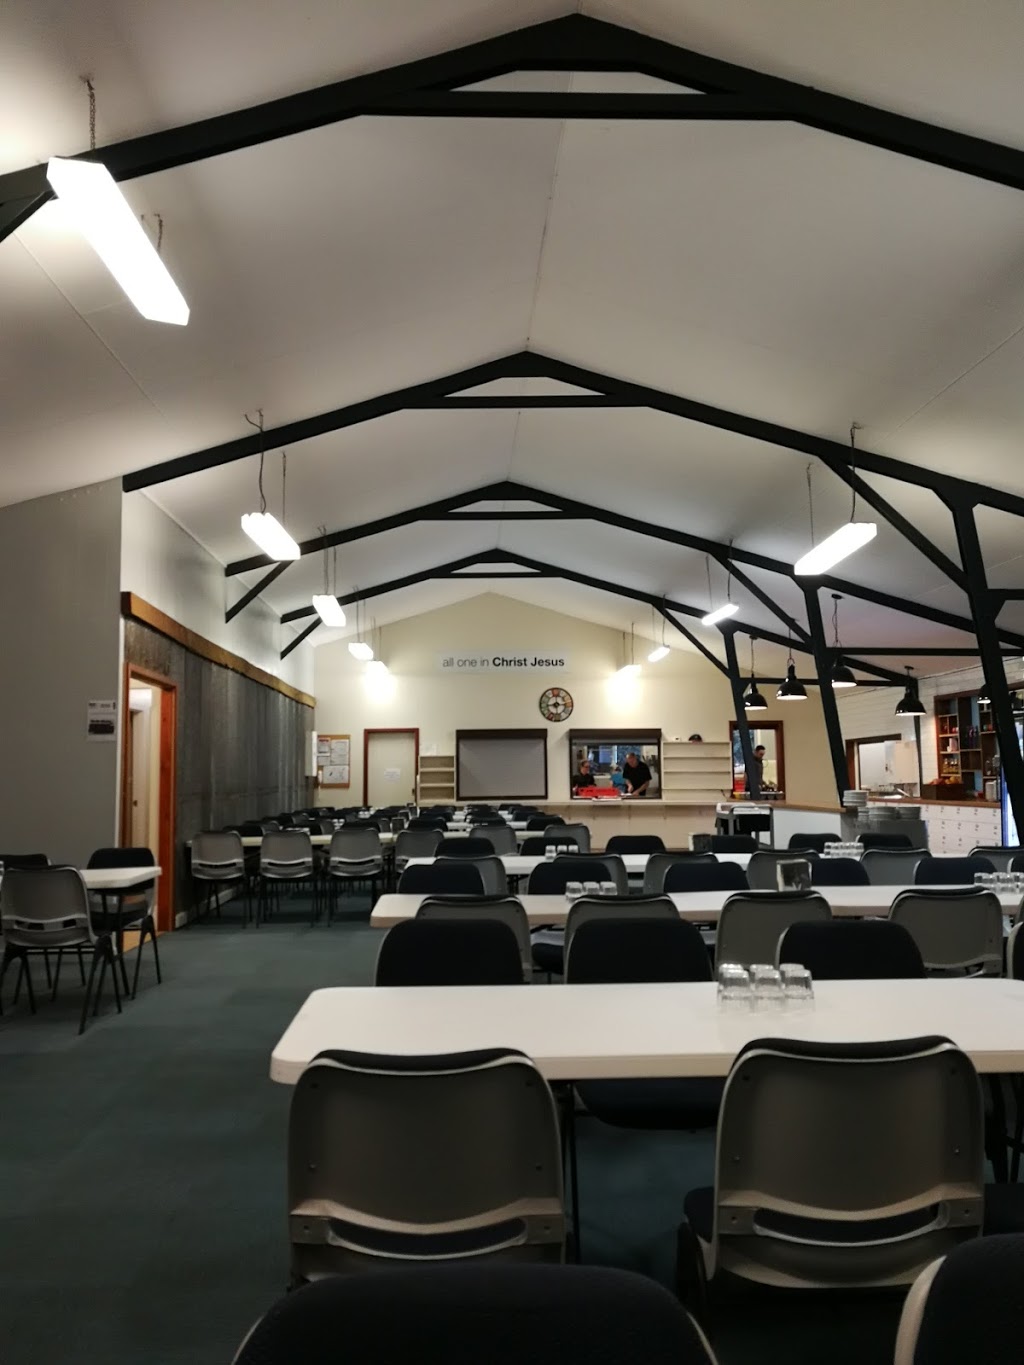 StayKCC - Katoomba Christian Convention | campground | 119 Cliff Dr, Katoomba NSW 2780, Australia | 0247808222 OR +61 2 4780 8222